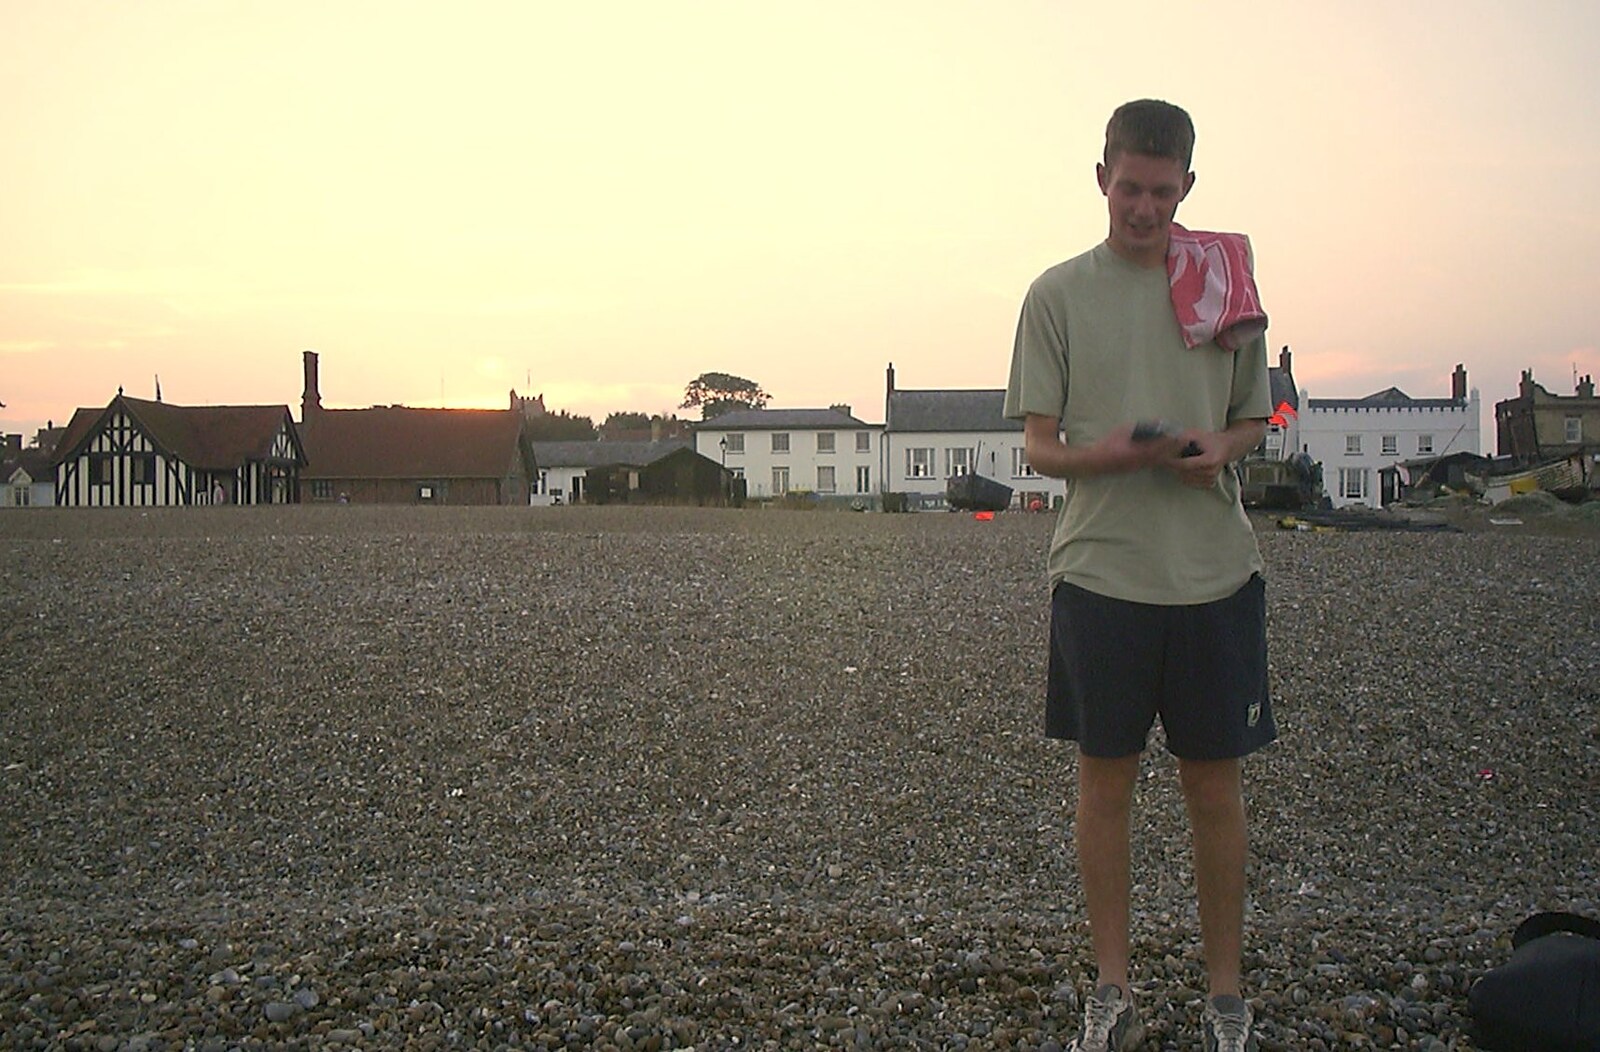 The Boy Phil on the beach from Fish and Chips on the Beach, Aldeburgh, Suffolk - 12th September 2003